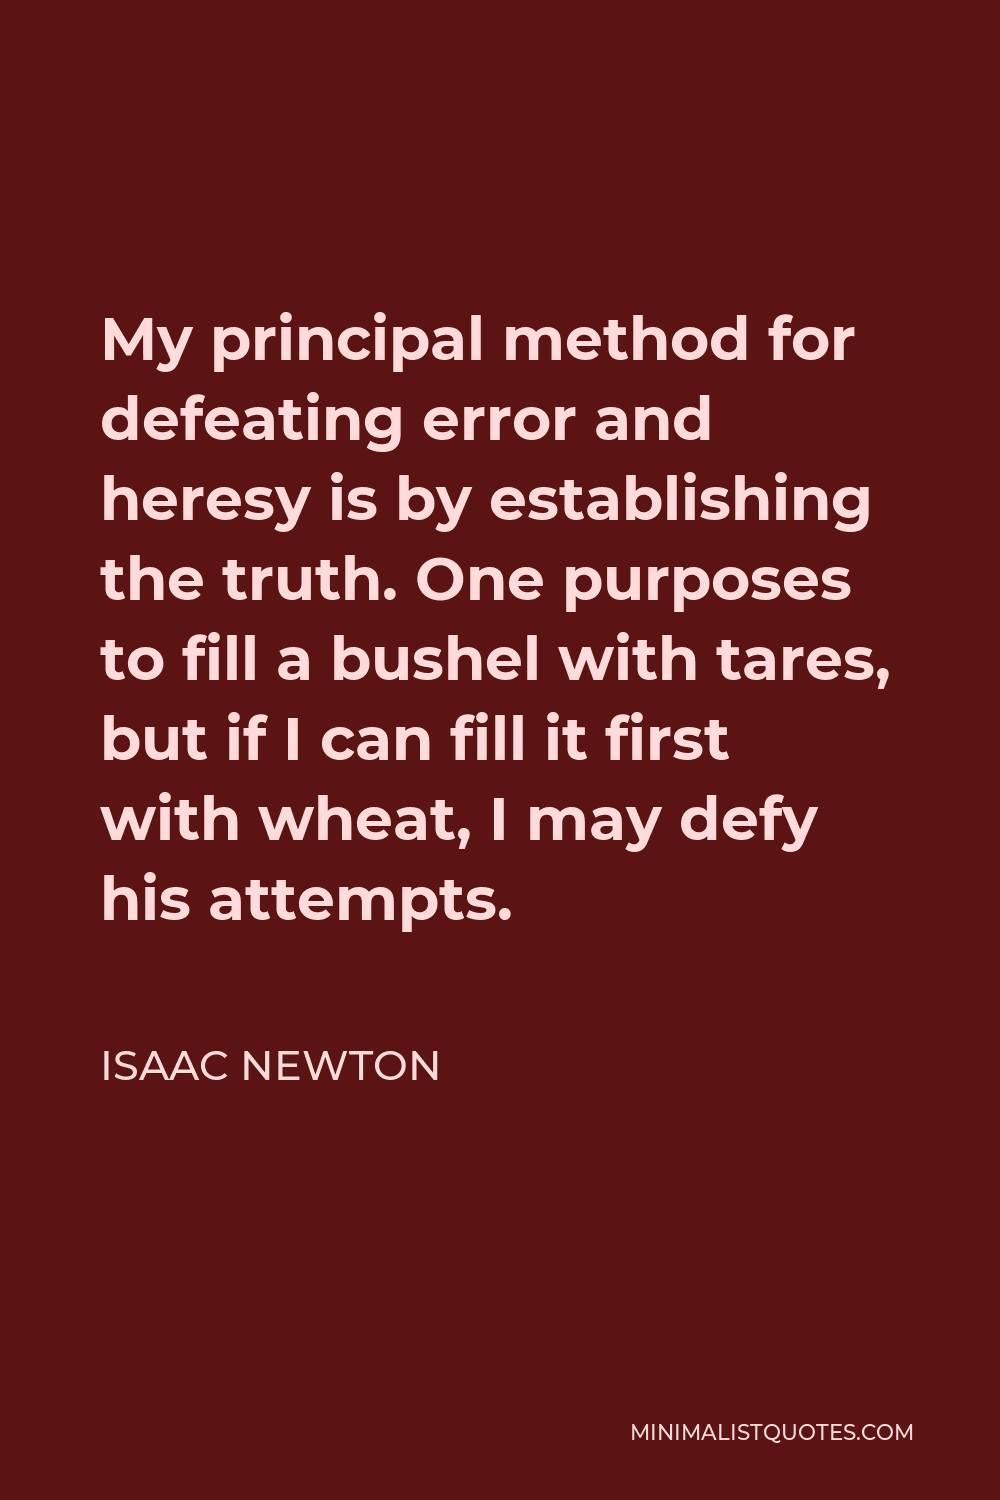 Isaac Newton Quote - My principal method for defeating error and heresy is by establishing the truth. One purposes to fill a bushel with tares, but if I can fill it first with wheat, I may defy his attempts.